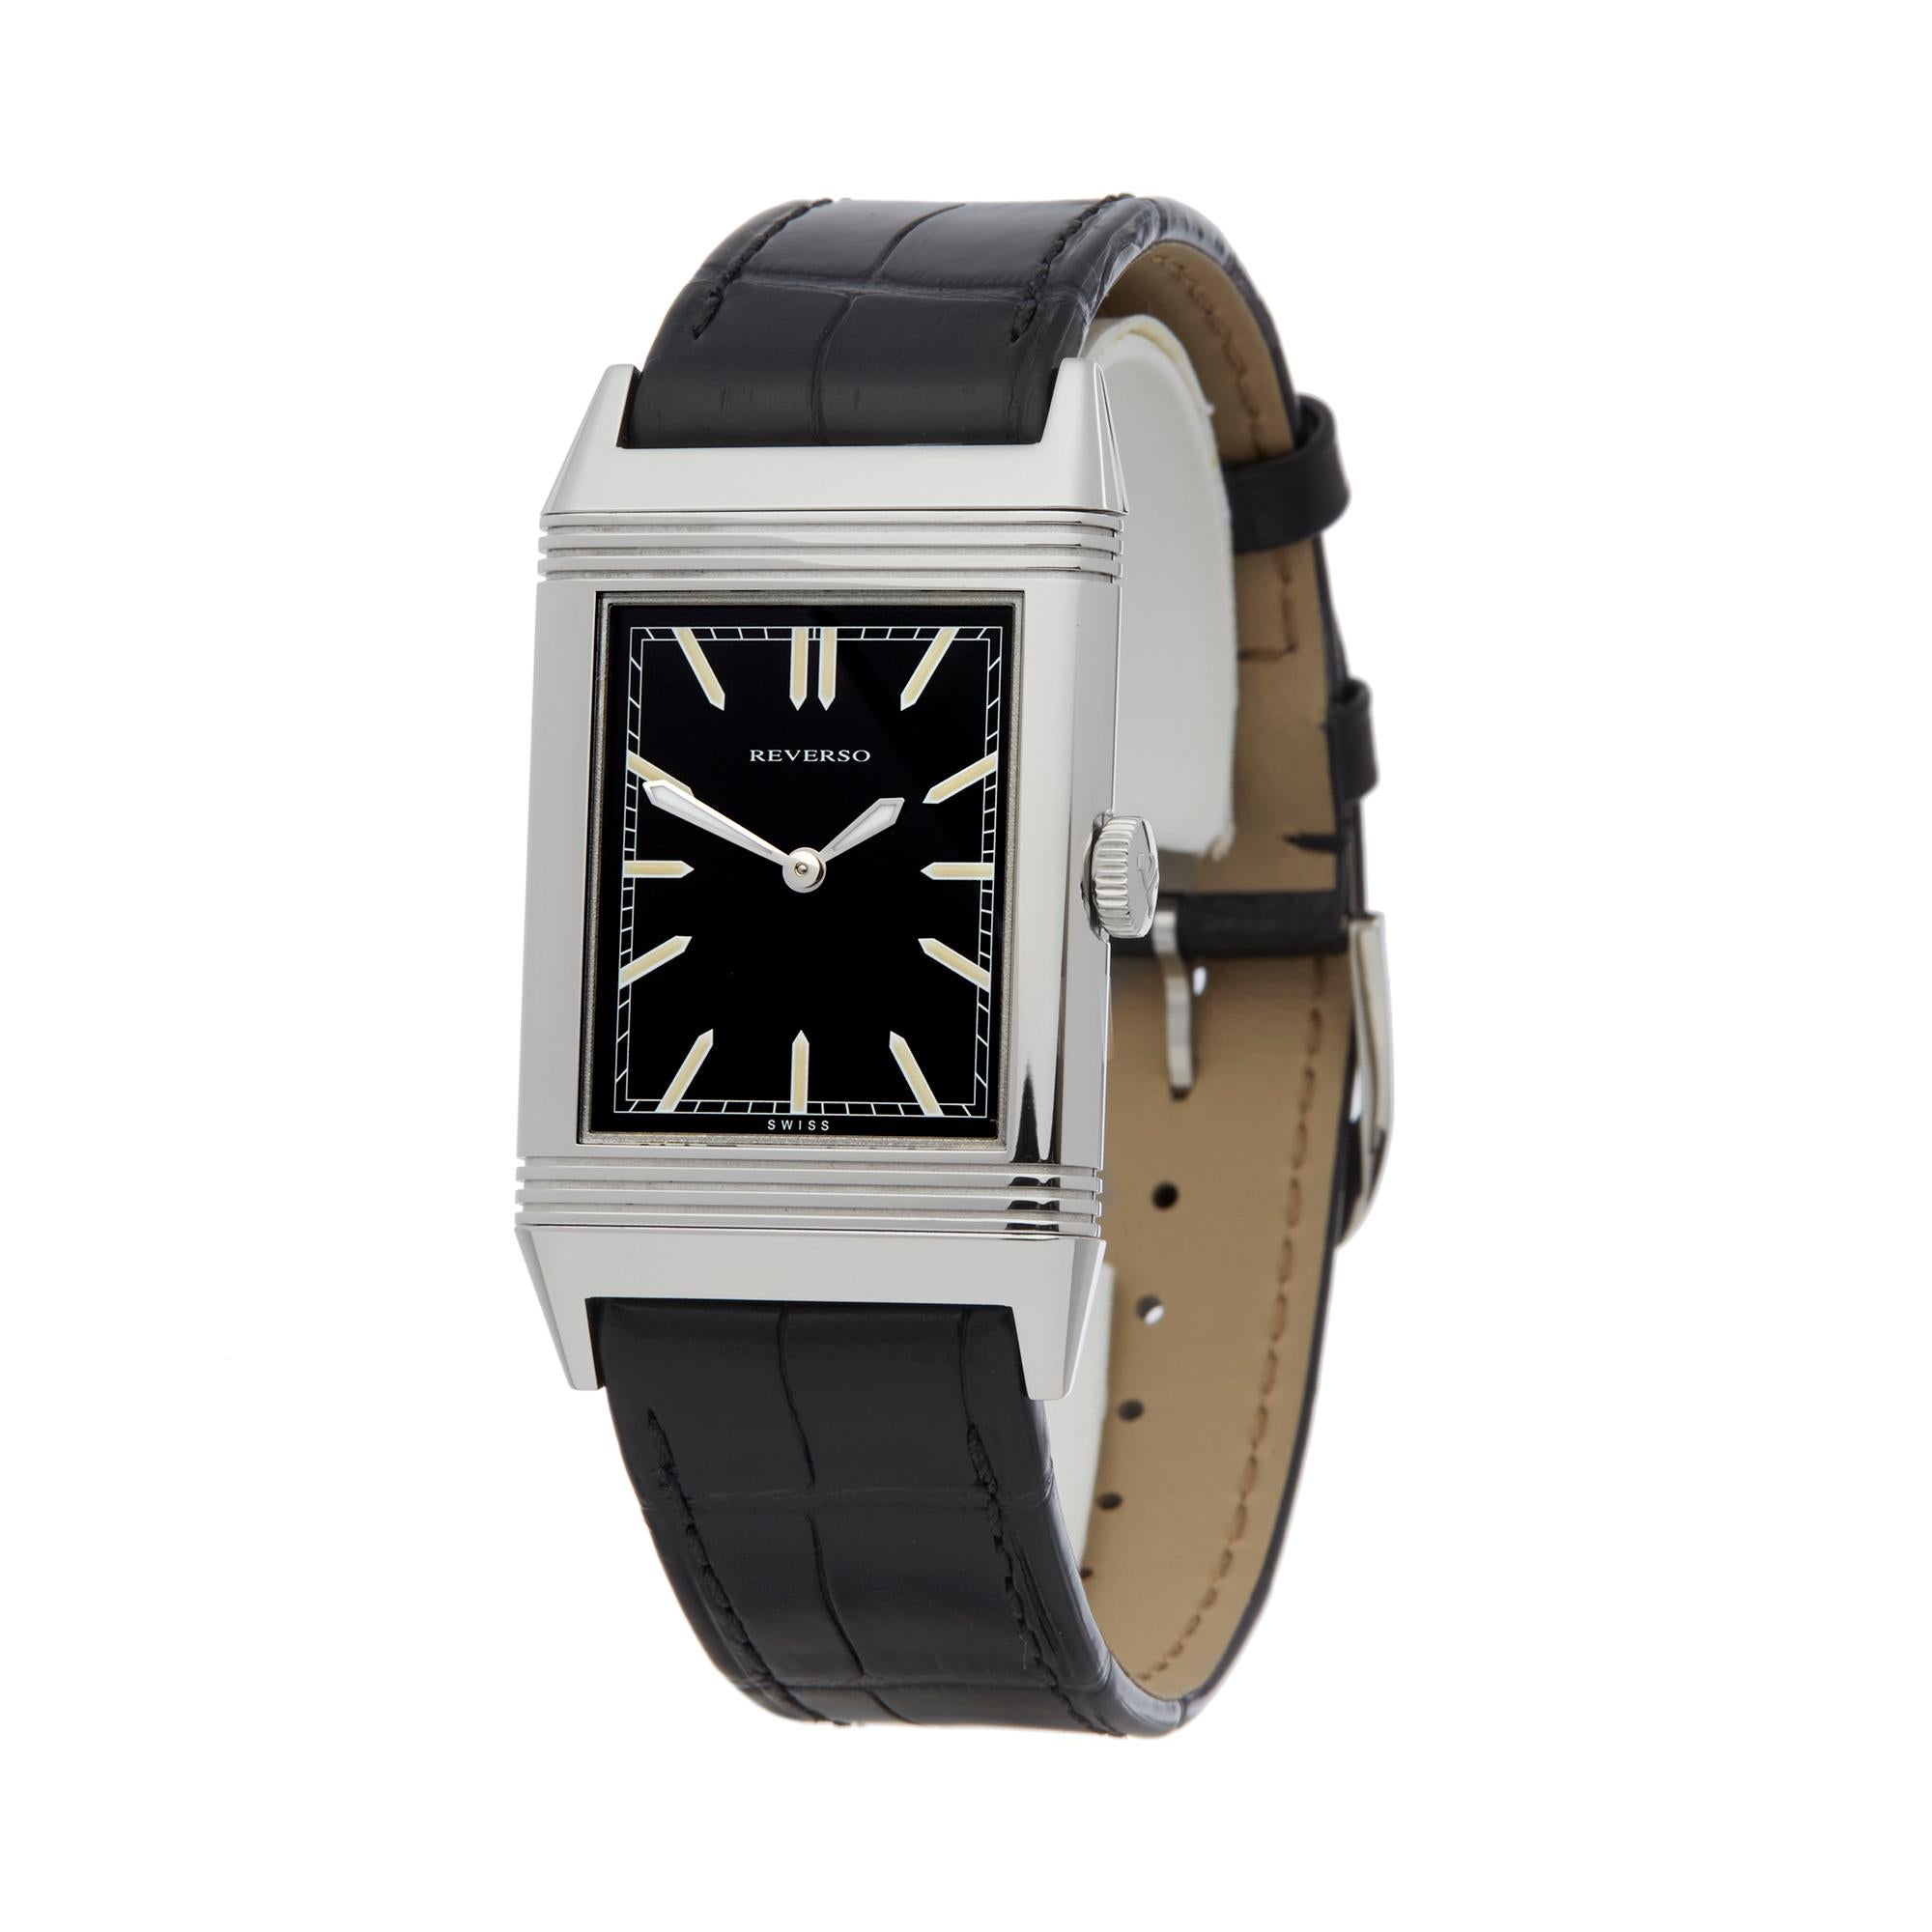 Ref: W5795
Manufacturer: Jaeger-LeCoultre
Model: Grand Reverso
Model Ref: Q2788570
Age: 1st July 2013
Gender: Mens
Complete With: Box & Guarantee Only
Dial: Black Baton
Glass: Sapphire Crystal
Movement: Mechanical Wind
Water Resistance: To